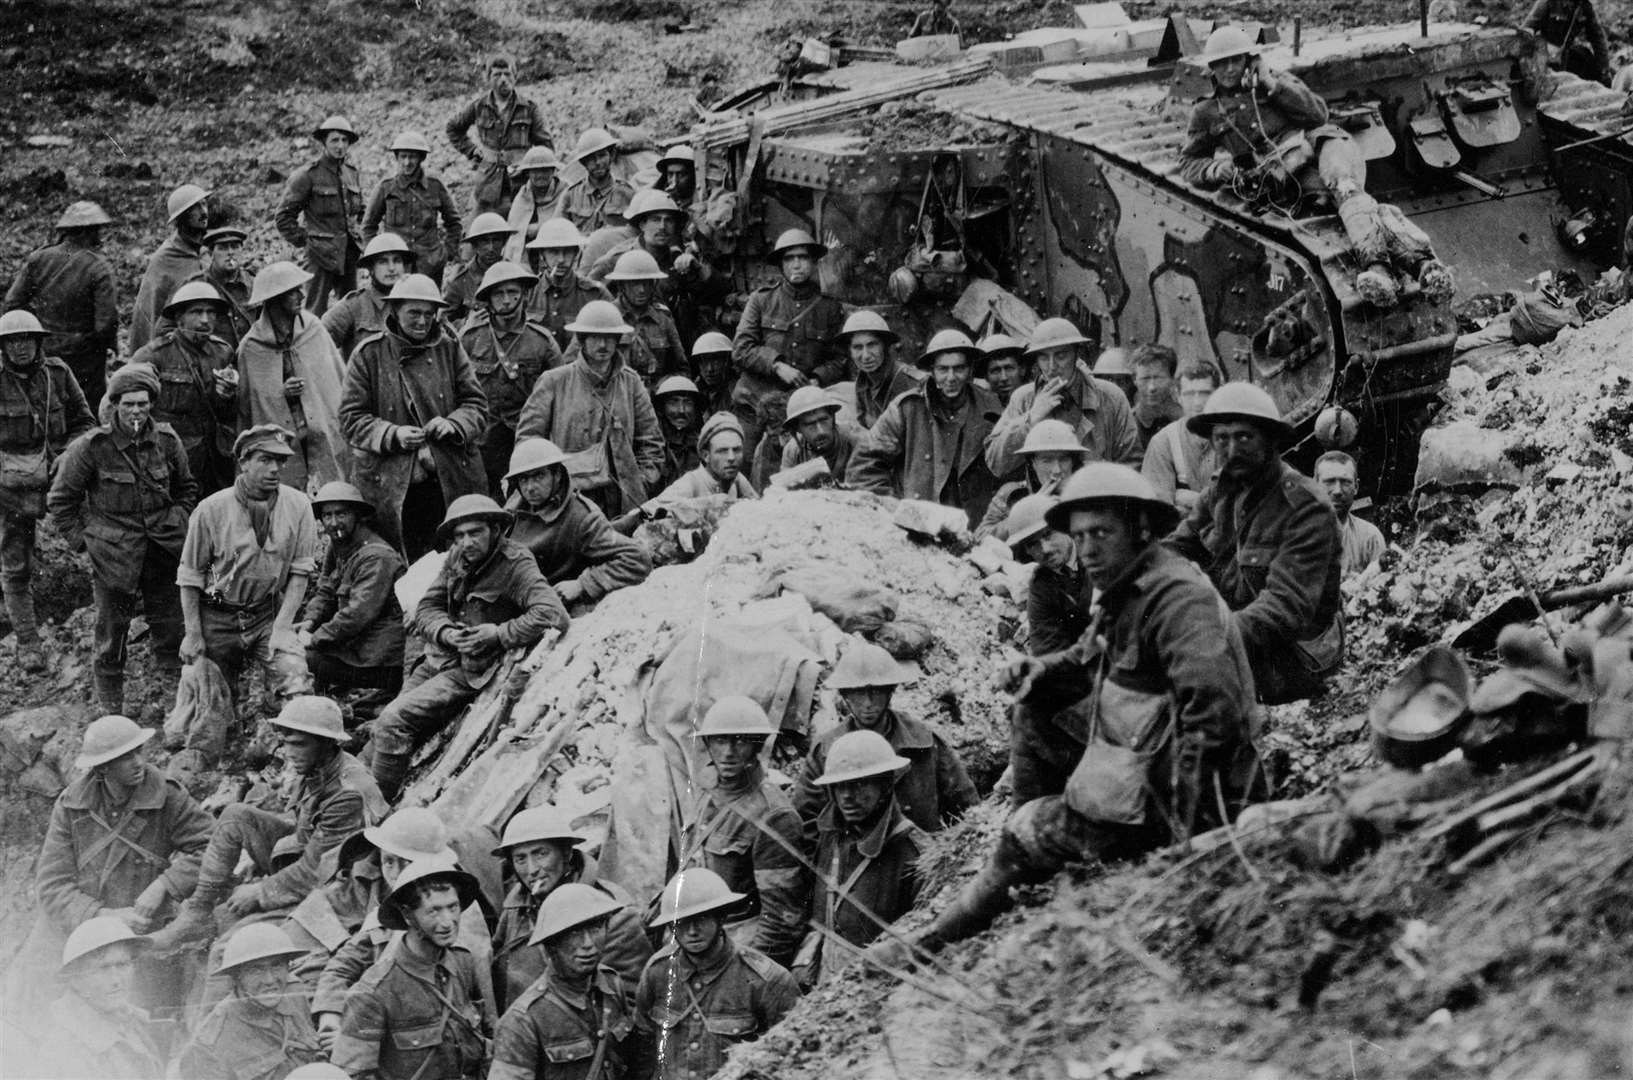 Undated handout file photo issued by the National Army Museum of soldiers with a tank at the Battle of the Somme. Picture credit: National Army Museum/Press Association Images